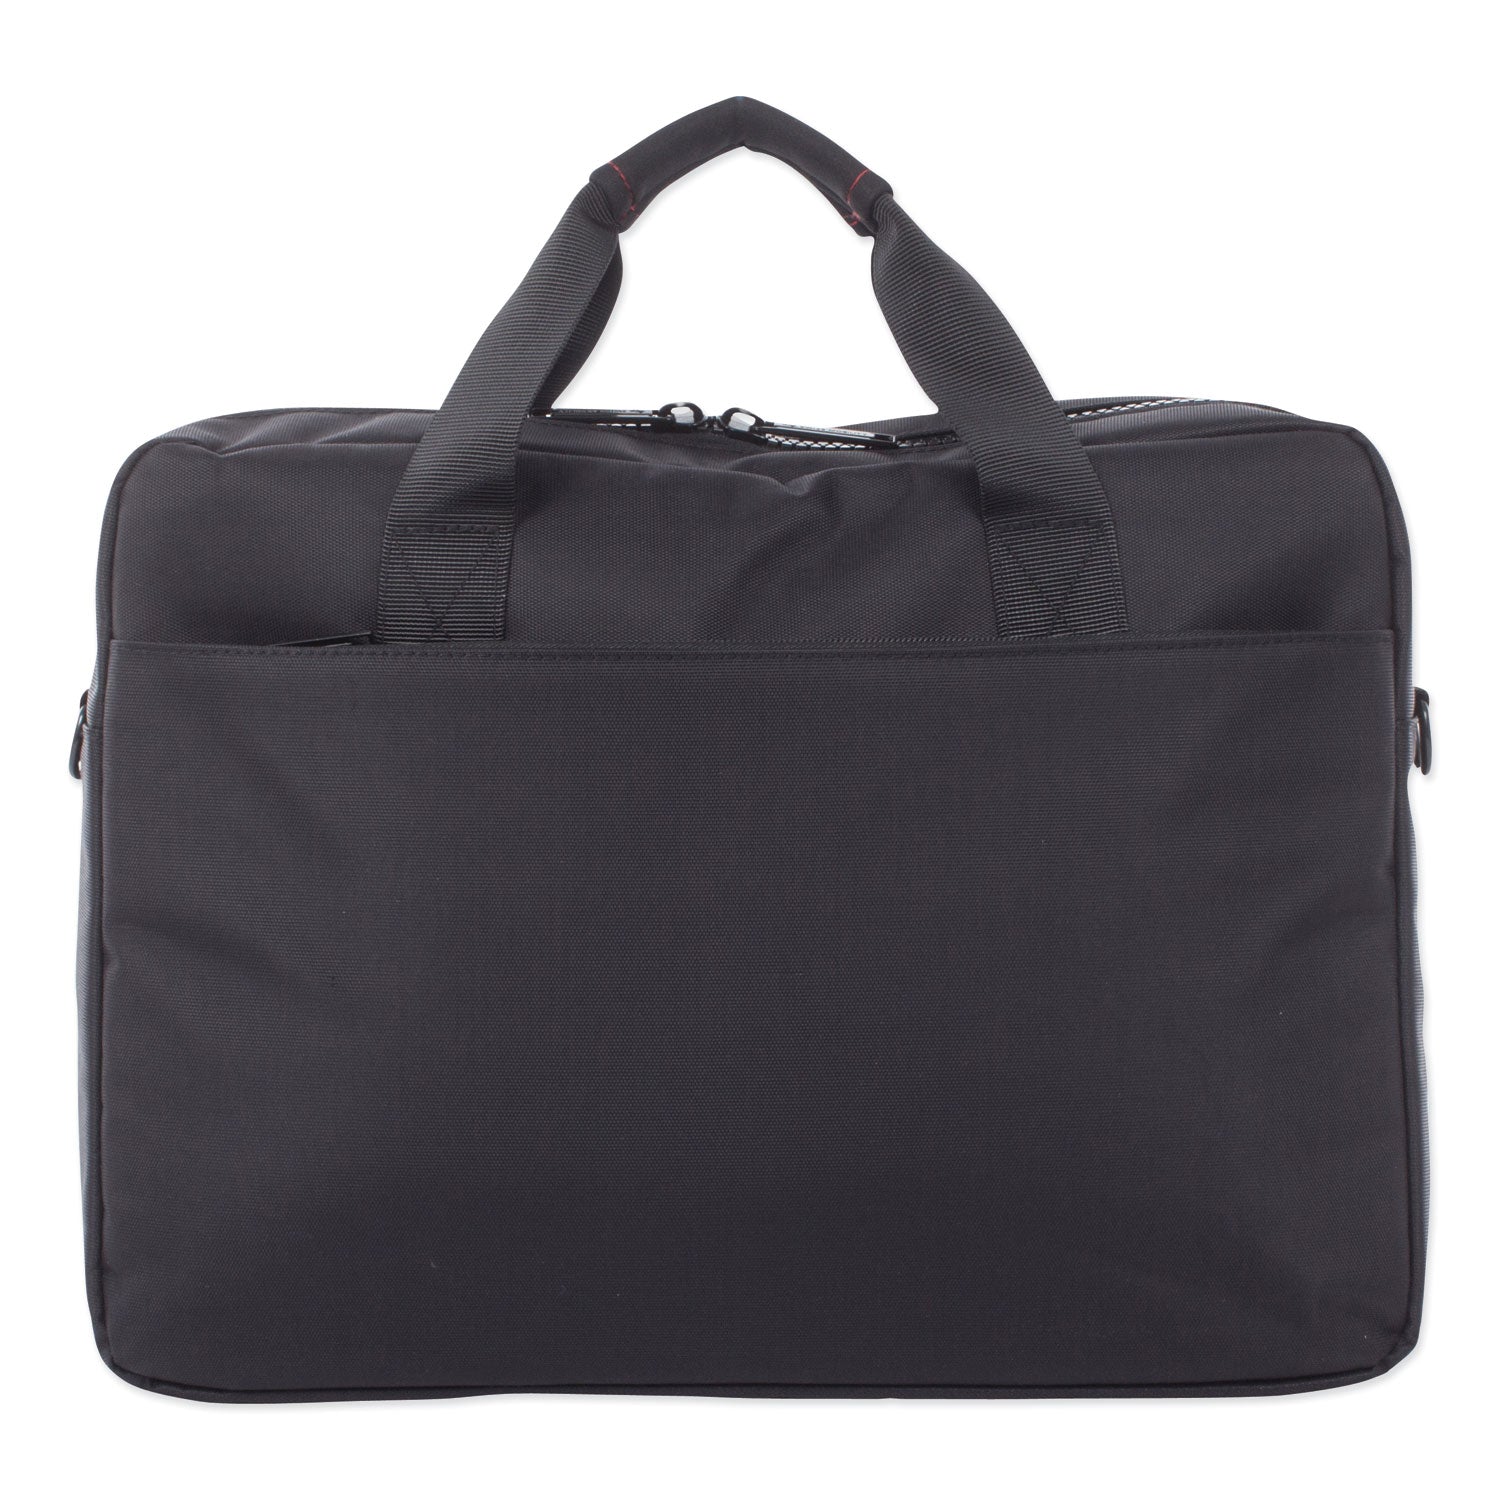 stride-executive-briefcase-fits-devices-up-to-156-polyester-4-x-4-x-115-black_swzexb1020smbk - 2